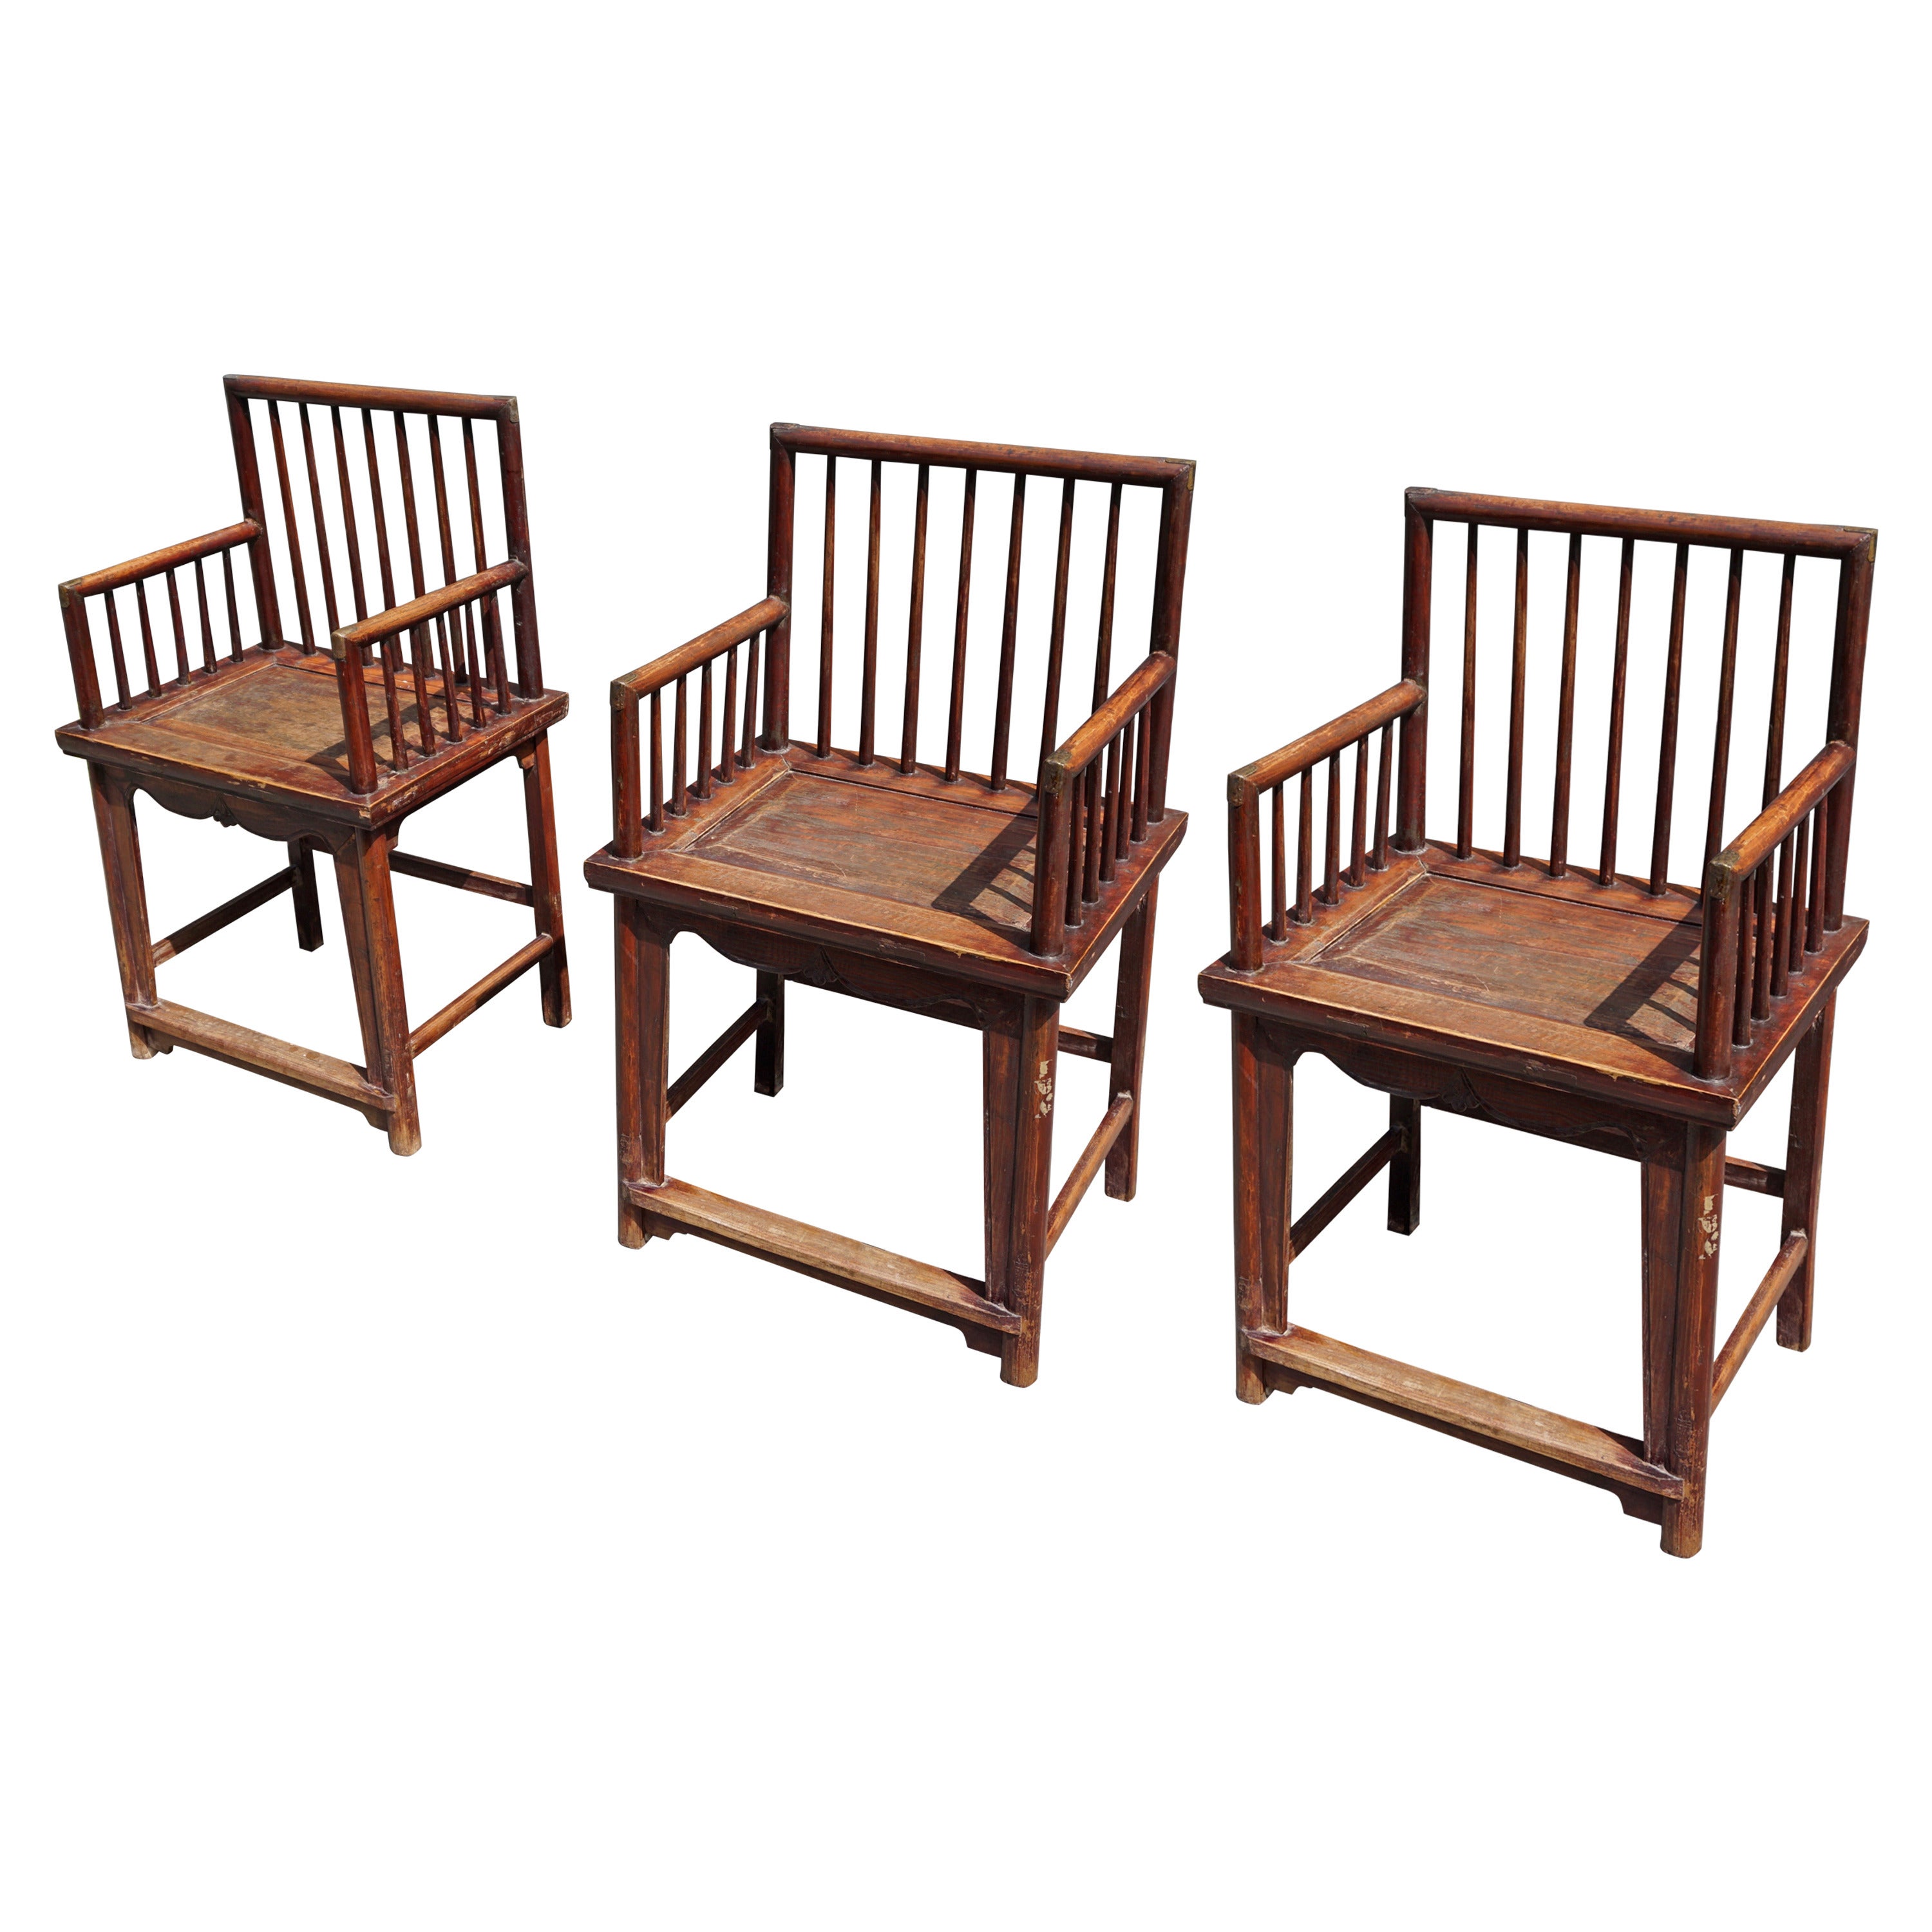 Set of Three Elegant Chinese Early 20th Century Spindle Back Chairs